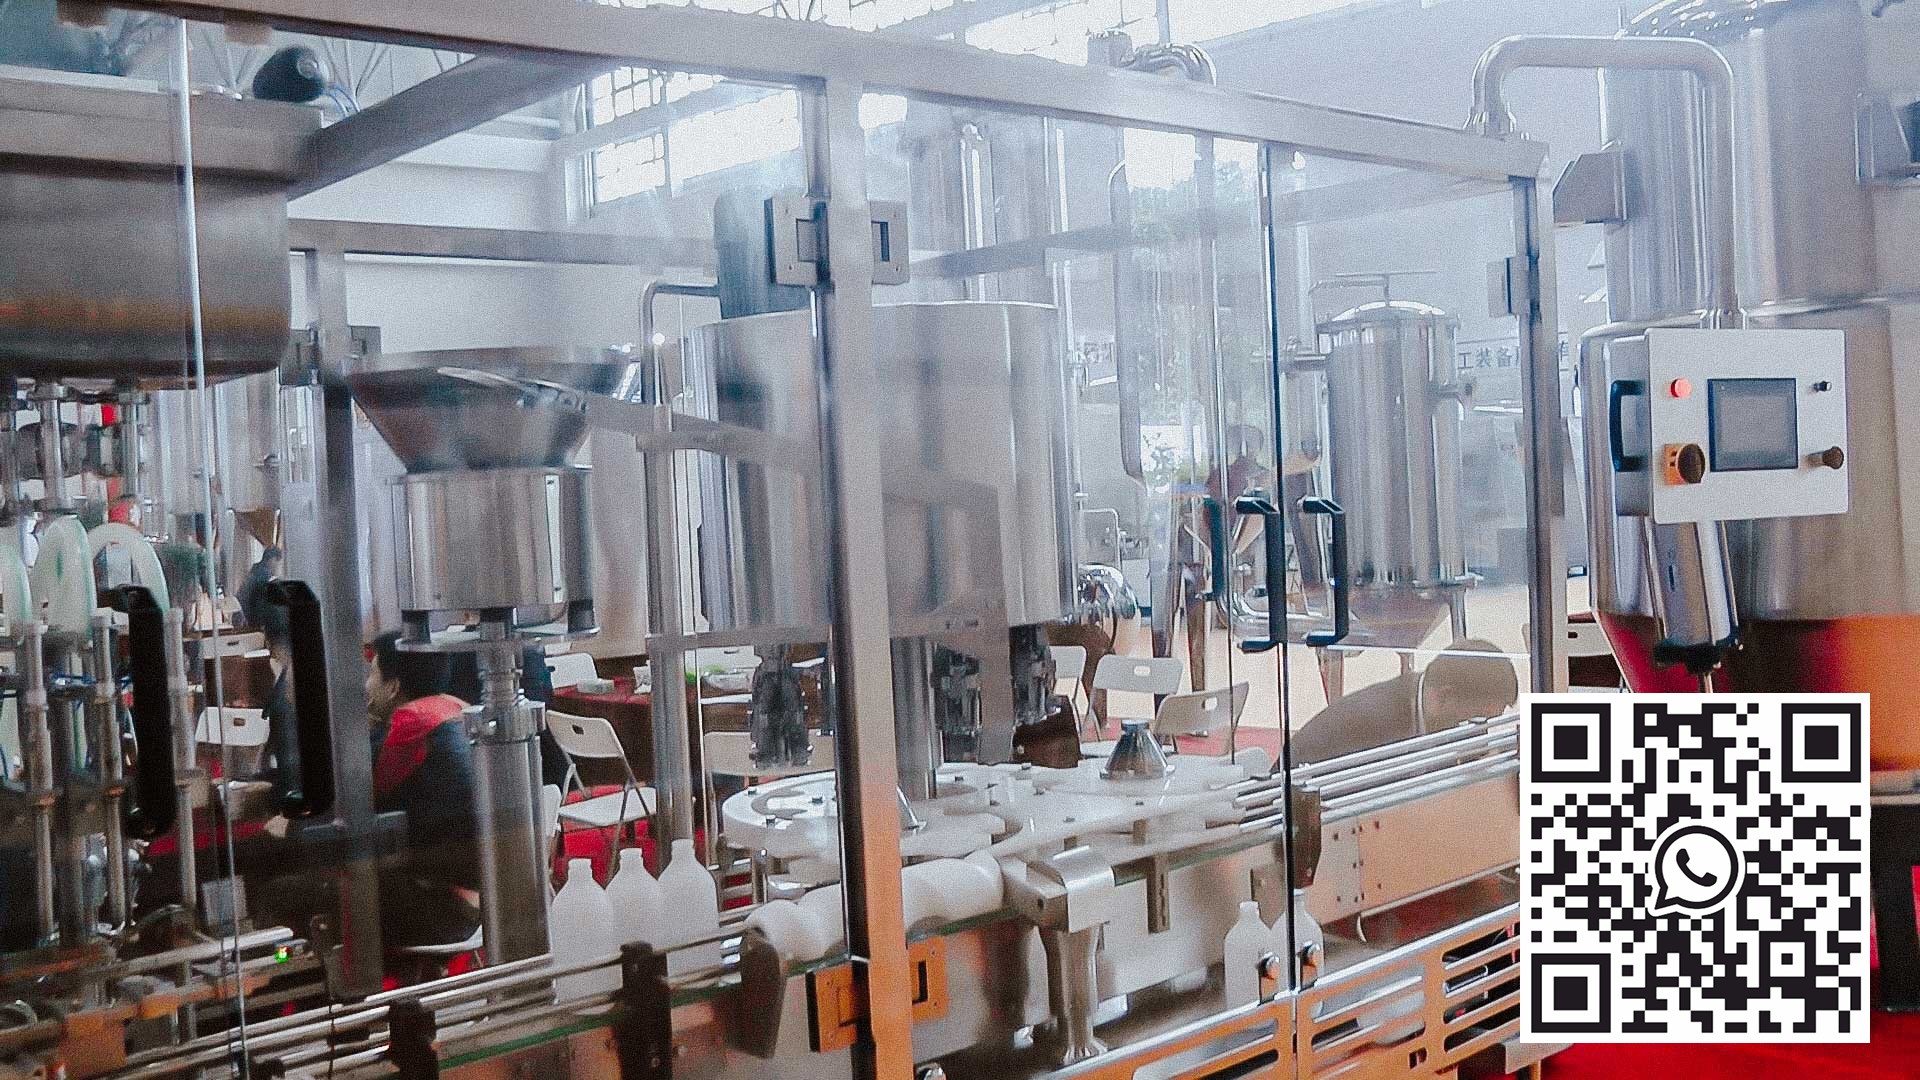 Automatic bottling machine for large plastic bottles and screw cap closure